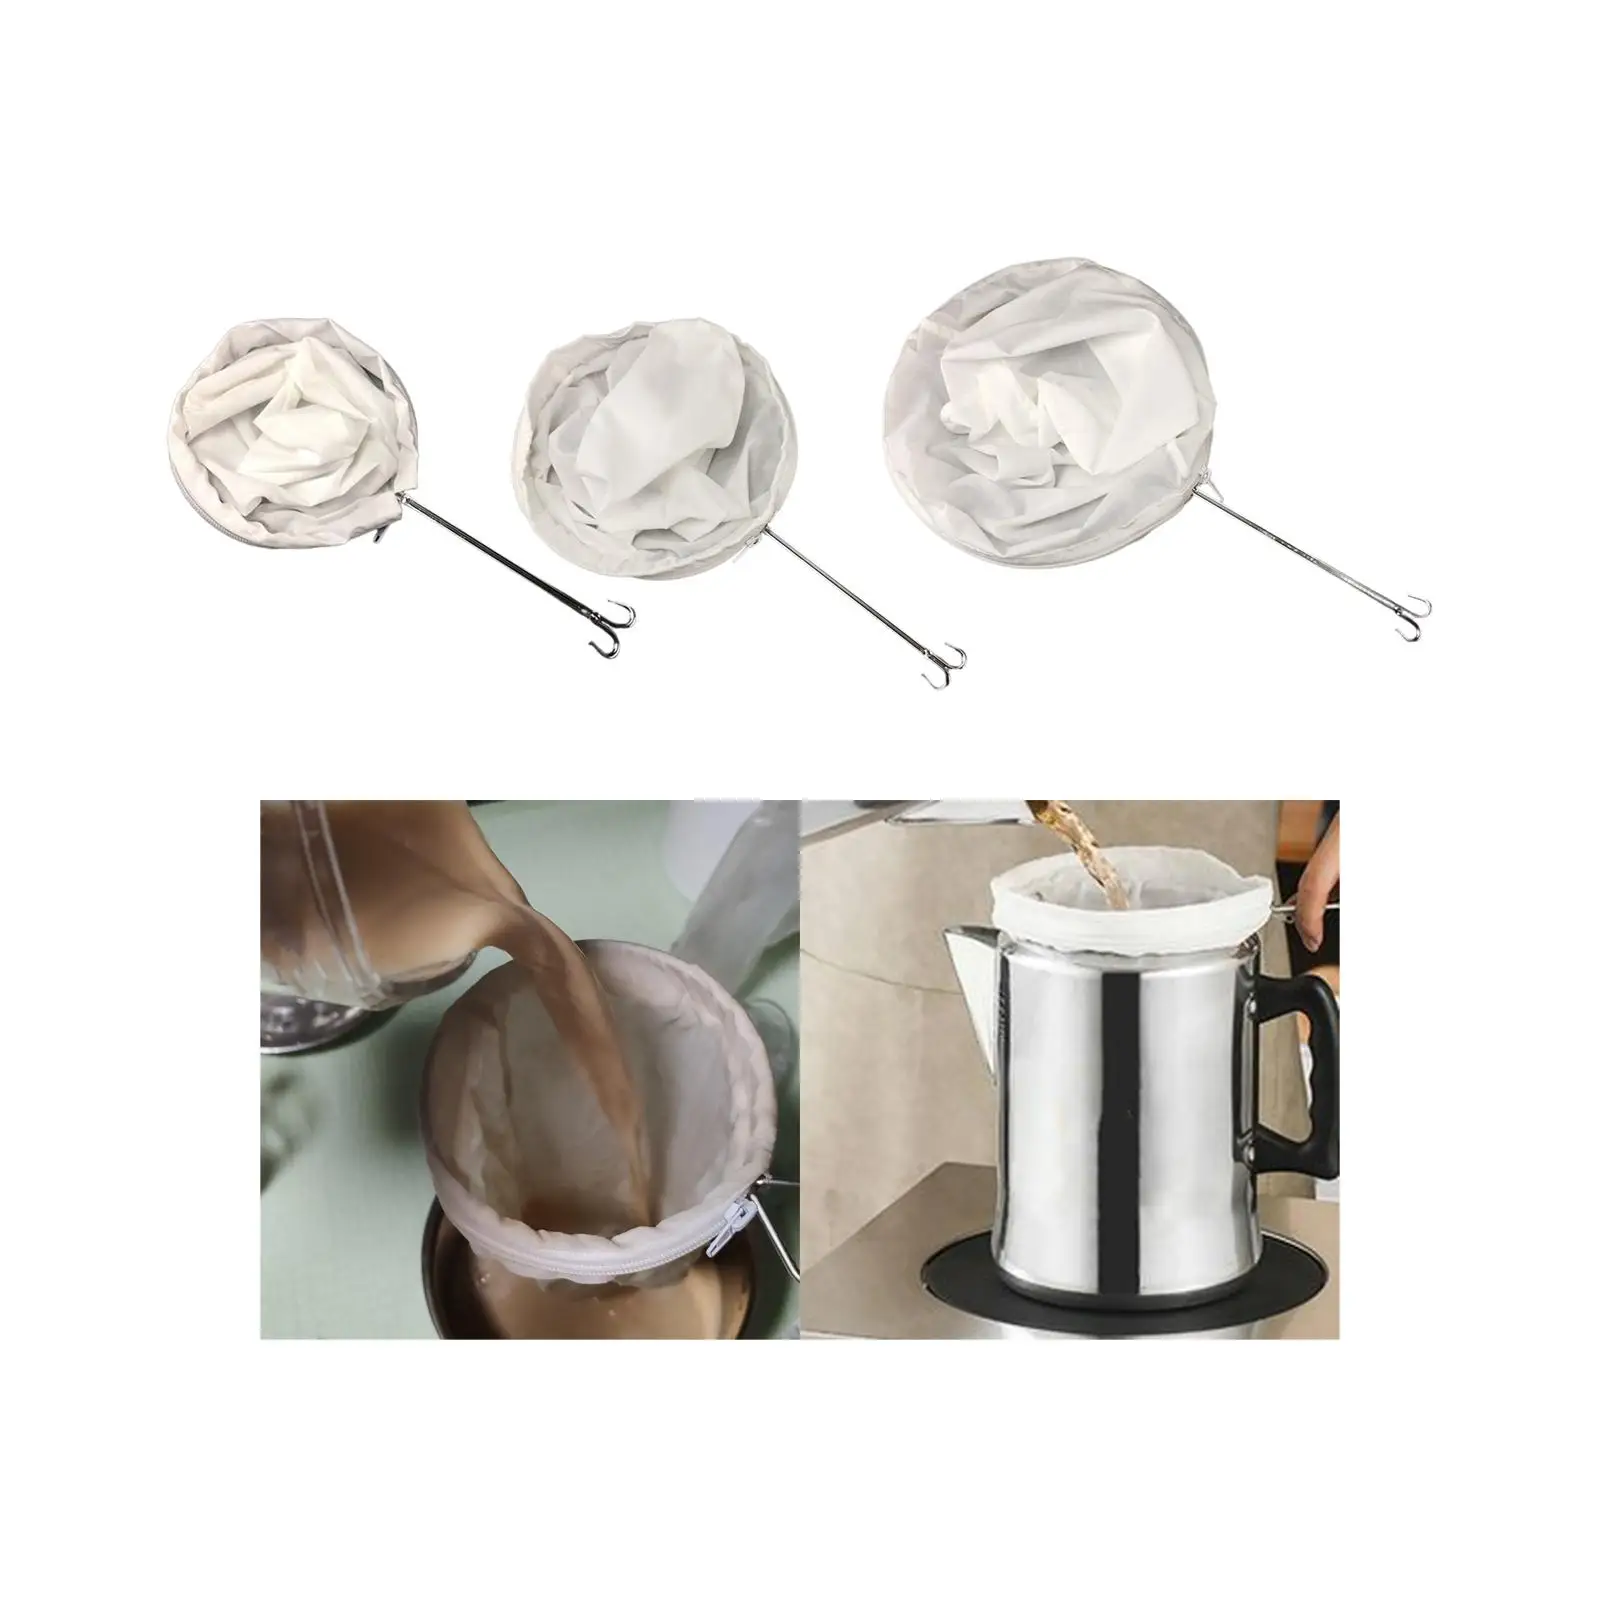 Milk Filter Bag Cheesecloth Reusable Unbeached with Sturdy Handle Mesh Strainer Bag for Tea Soup Fruit Juice Yogurt Milk